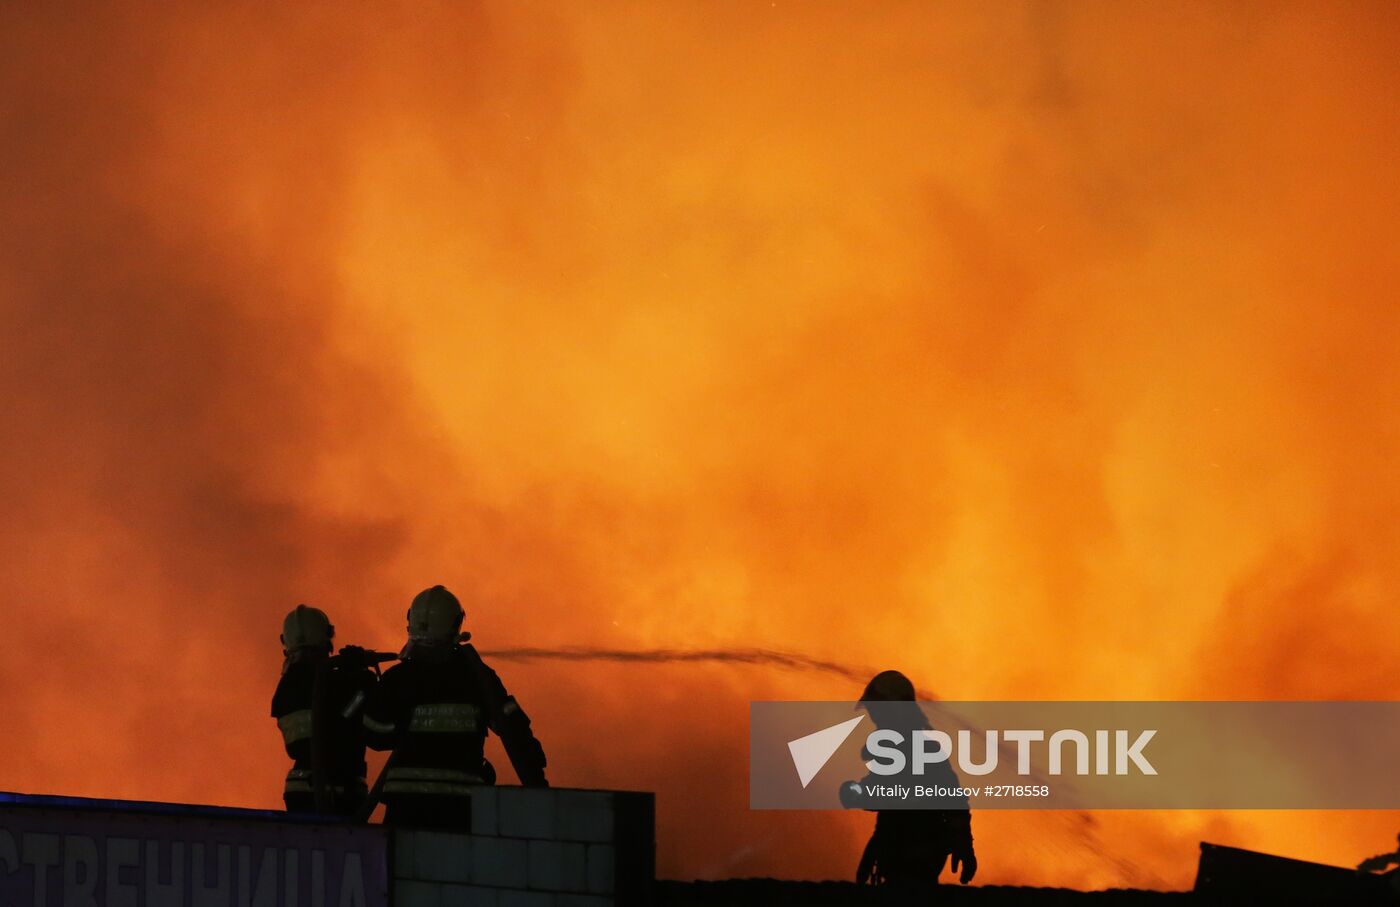 Fire at Melnitsa construction market in Moscow